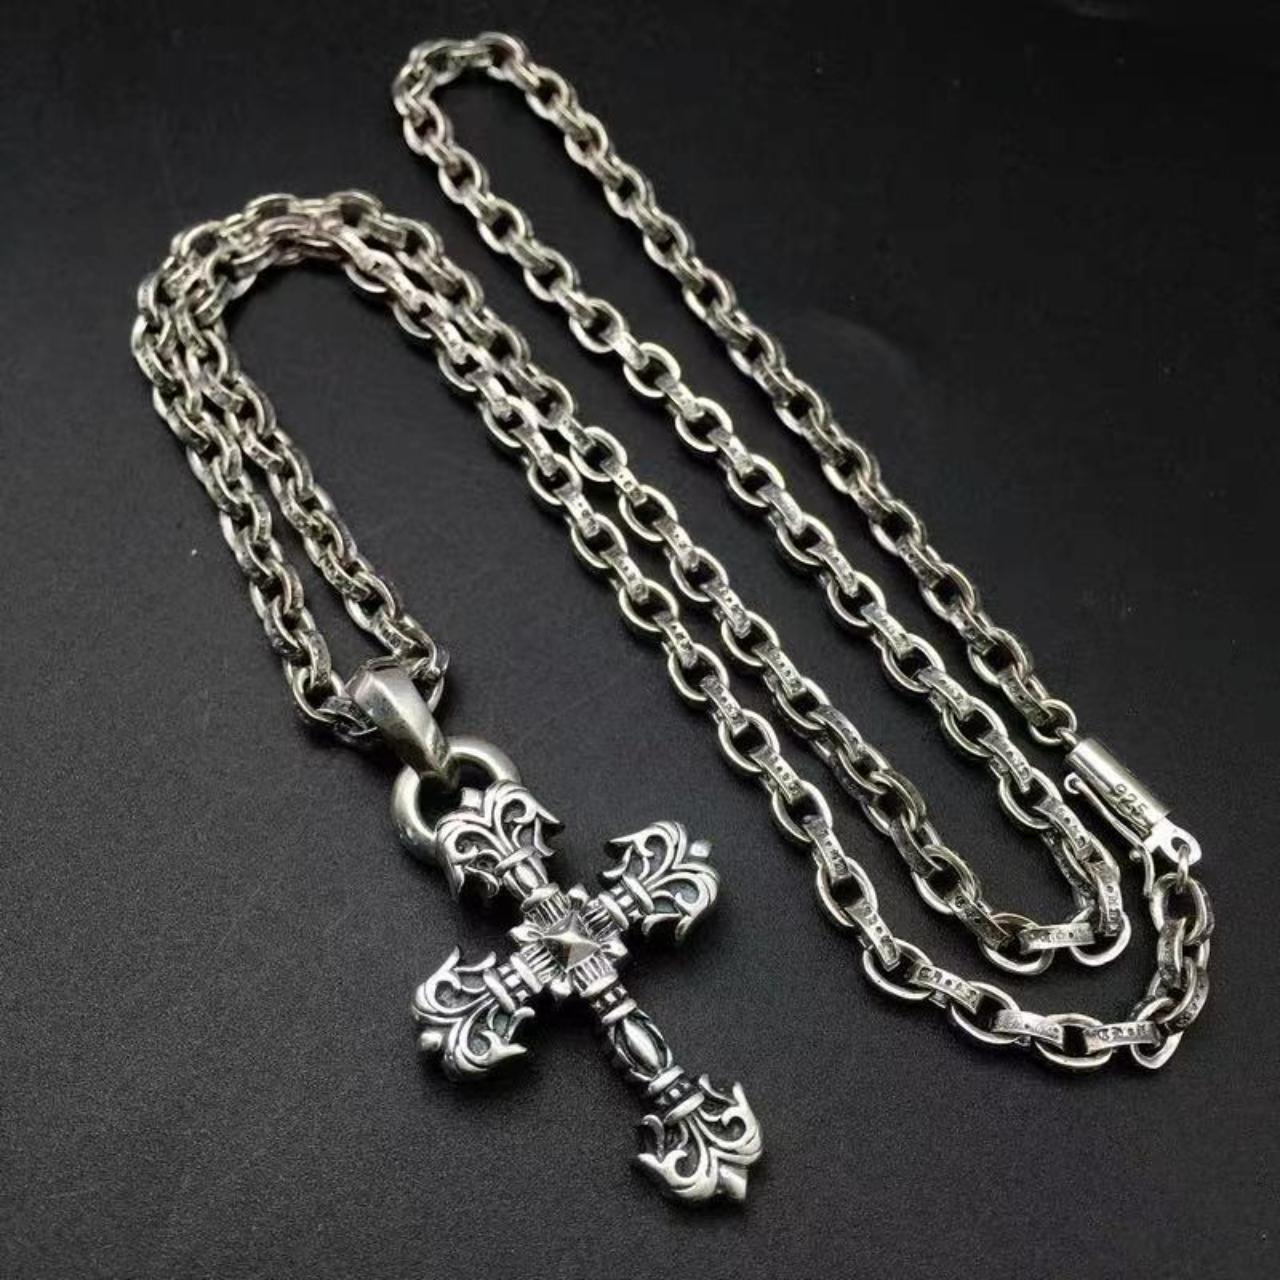 Chrome Hearts Necklace 